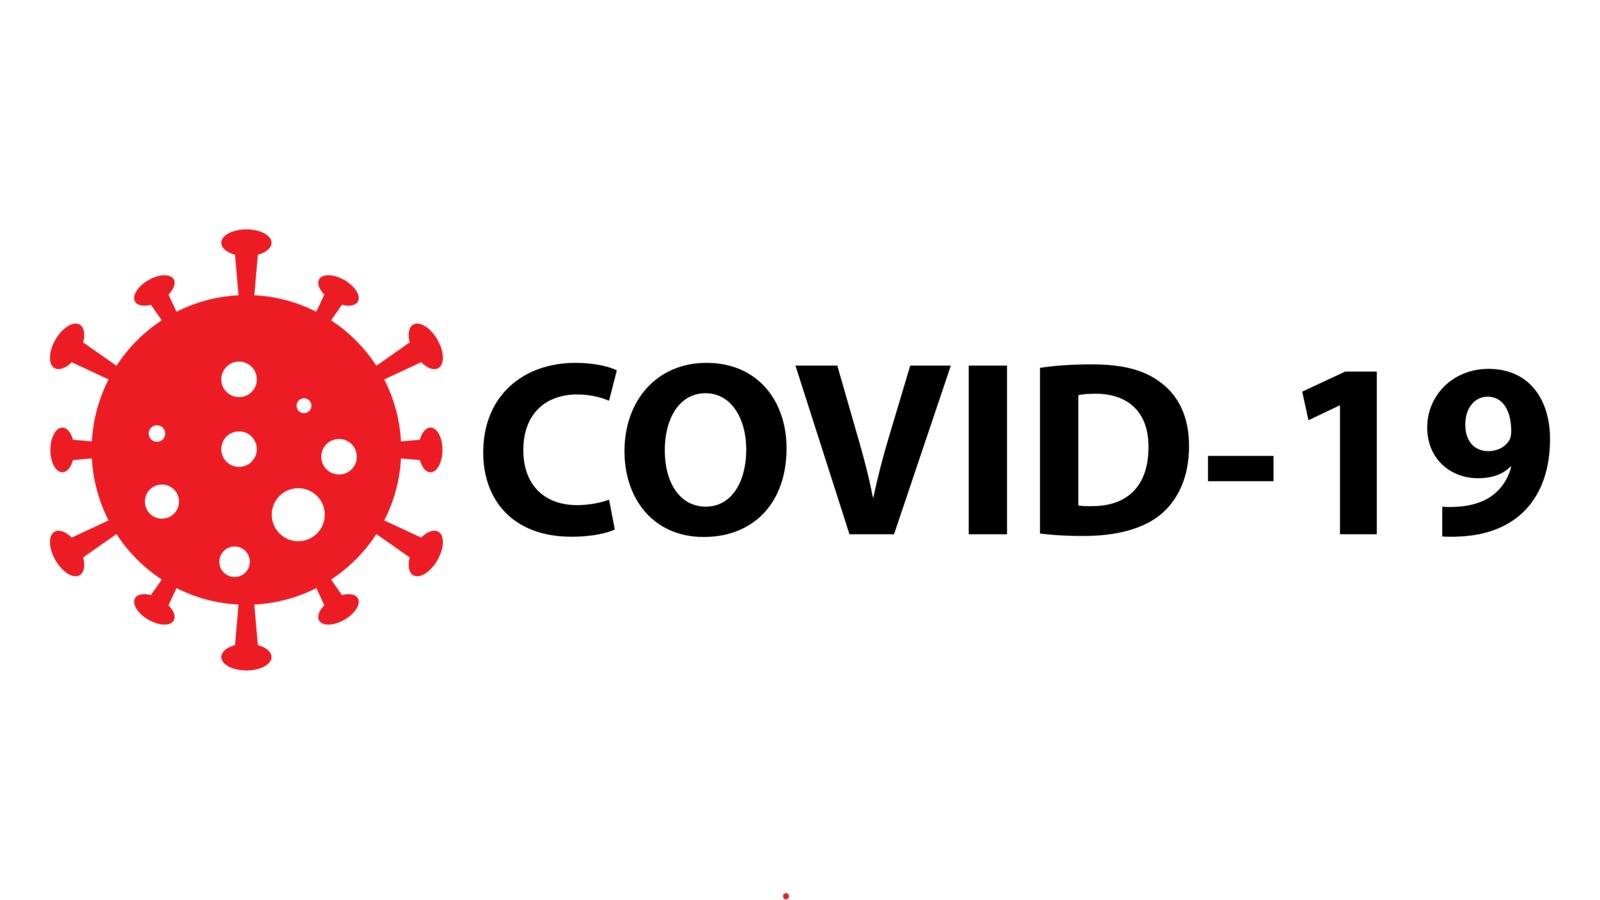 Covid-19 coronavirus pandemic outbreak minimal banner on white background. Stay at home quarantine concept. Health care and medical vector.